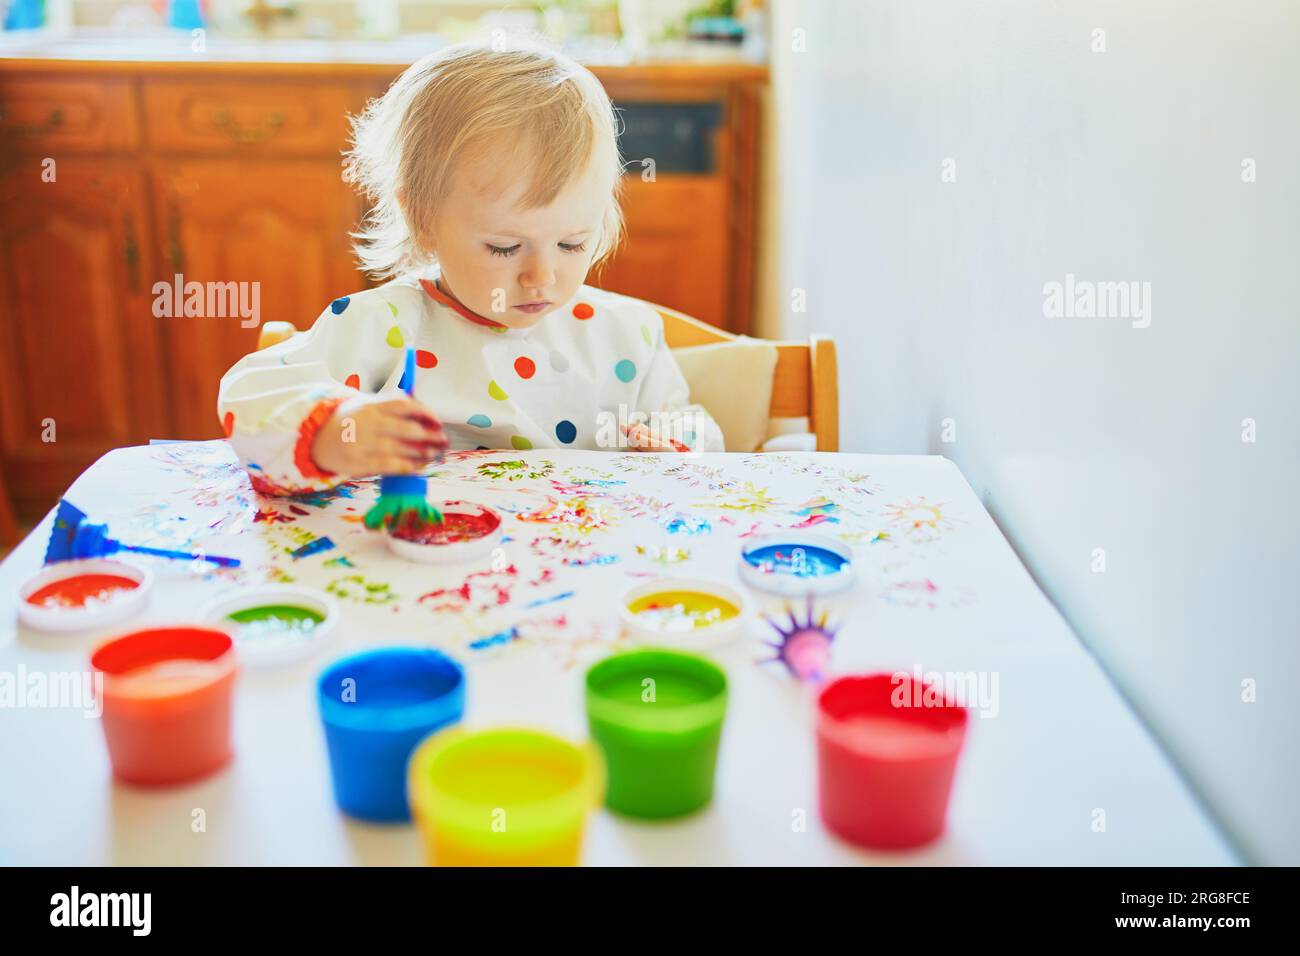 Adorable little girl painting with fingers at home, in kindergaten or preschool. Creative games for kids staying at home Stock Photo